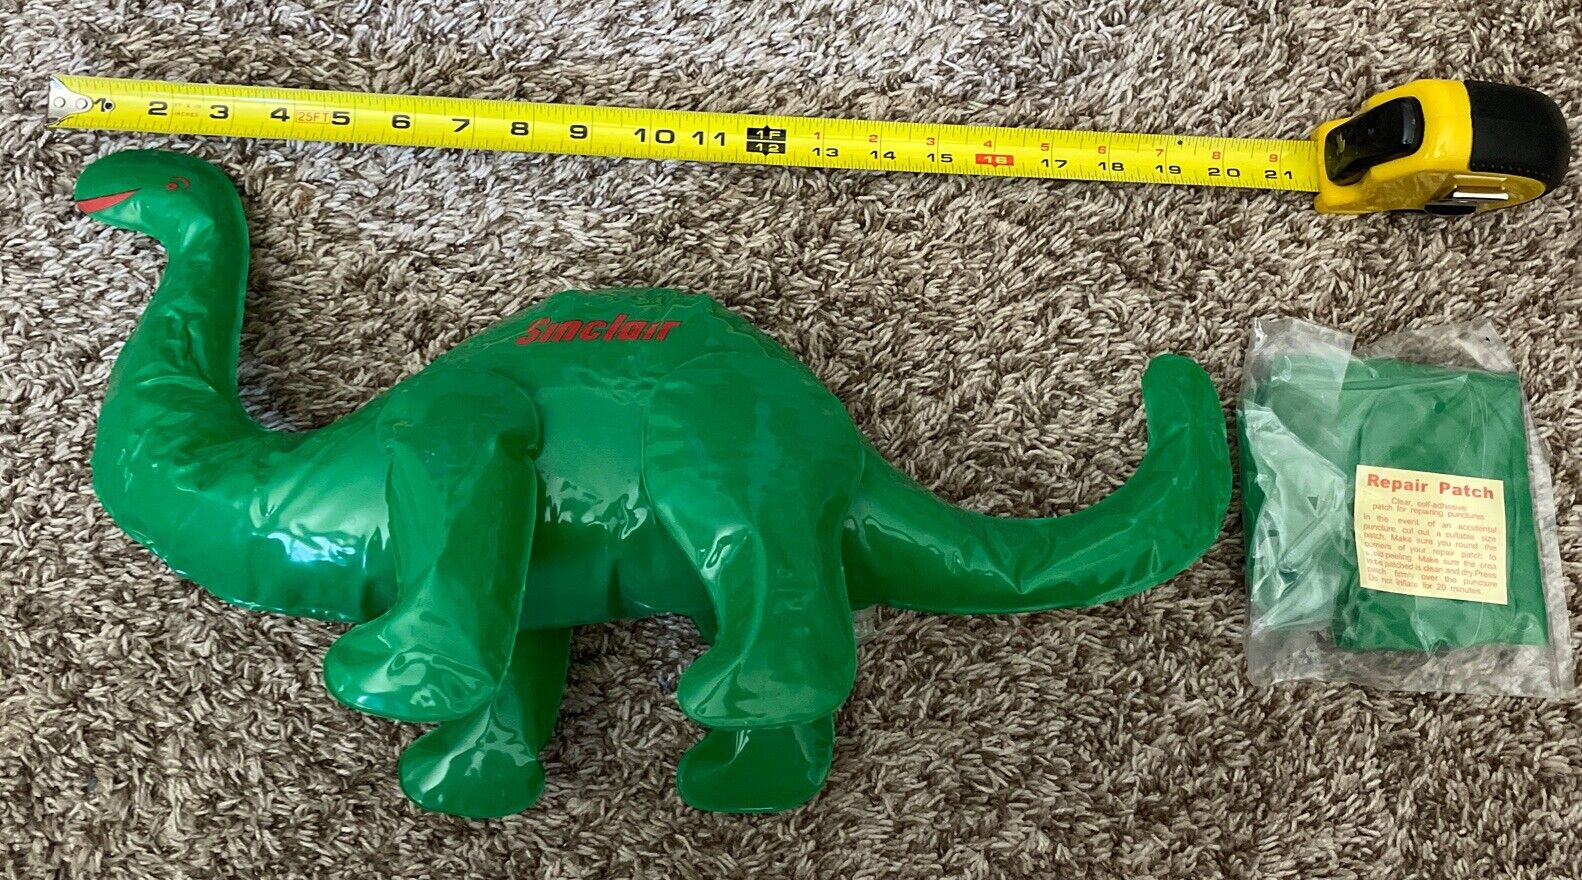 new in package sinclair oil gas gasoline company inflatable blow up dinosaur